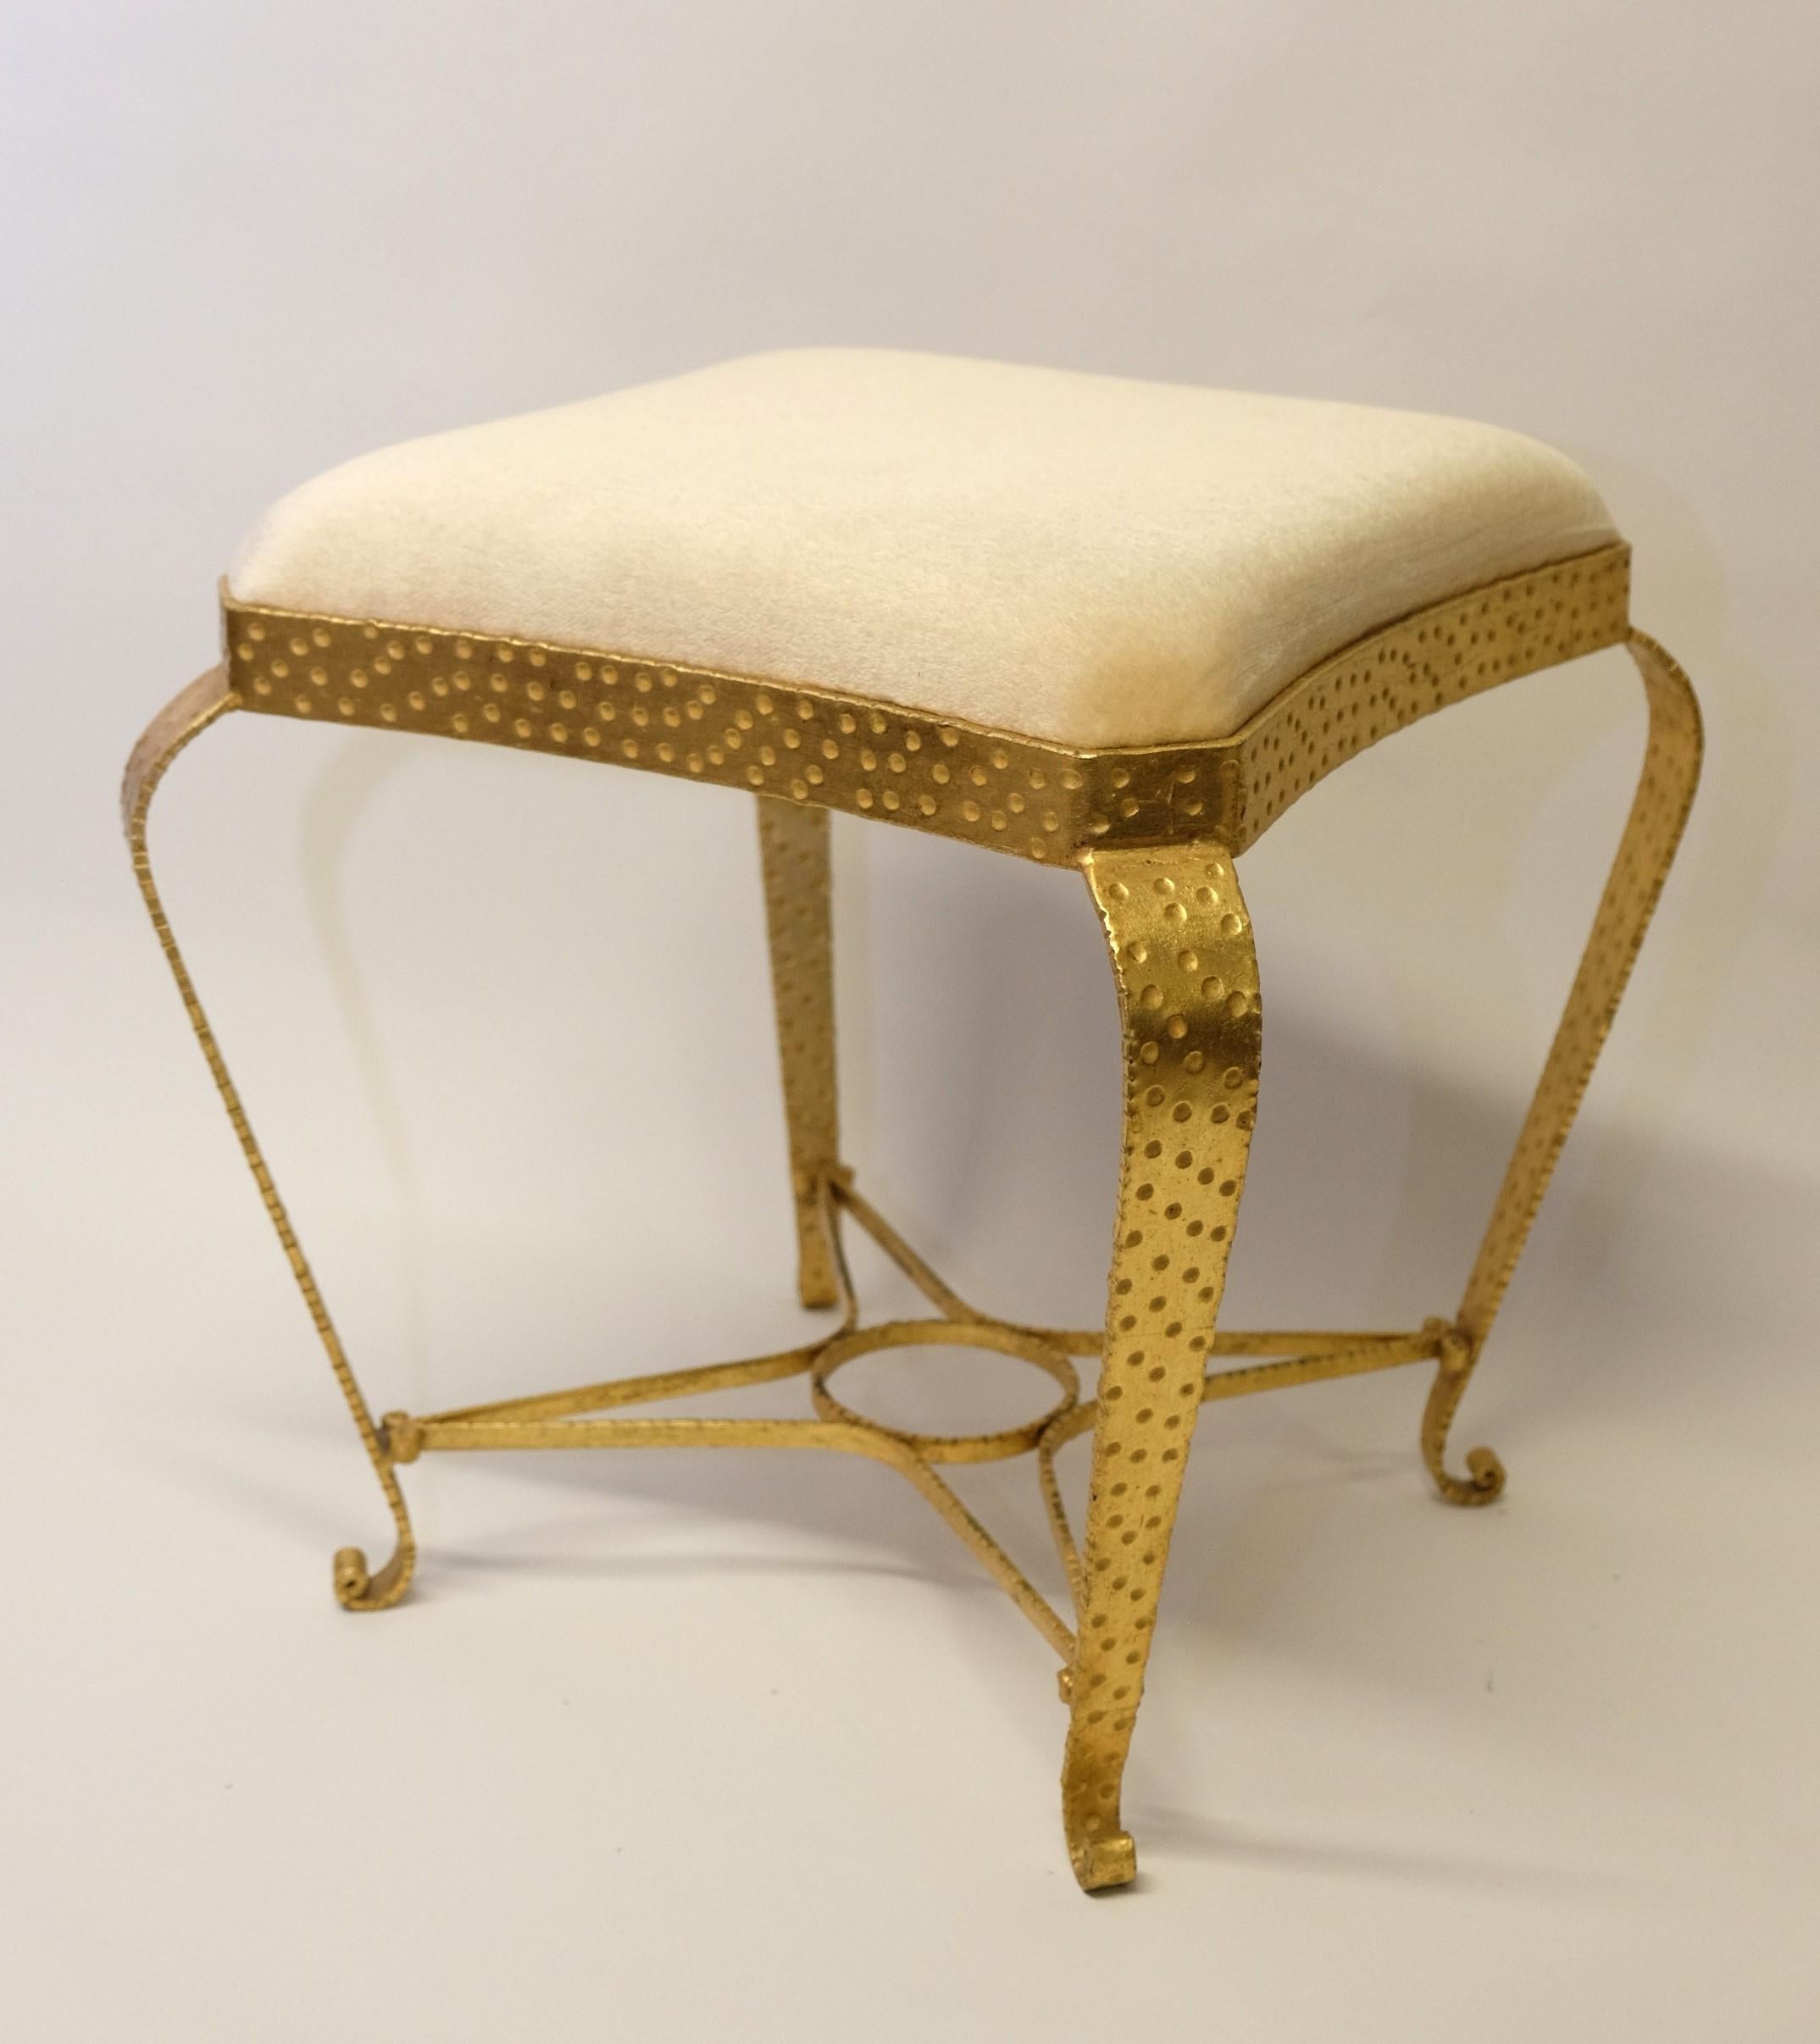 Stool by Pier Luigi Colli, Italy 1950s. 

Hammered gold plated metal with a fine cream fabric upholstery. Very good workmanship and elegant appearance.

Nice, well-maintained condition. The gilding on the frame has come off in a few